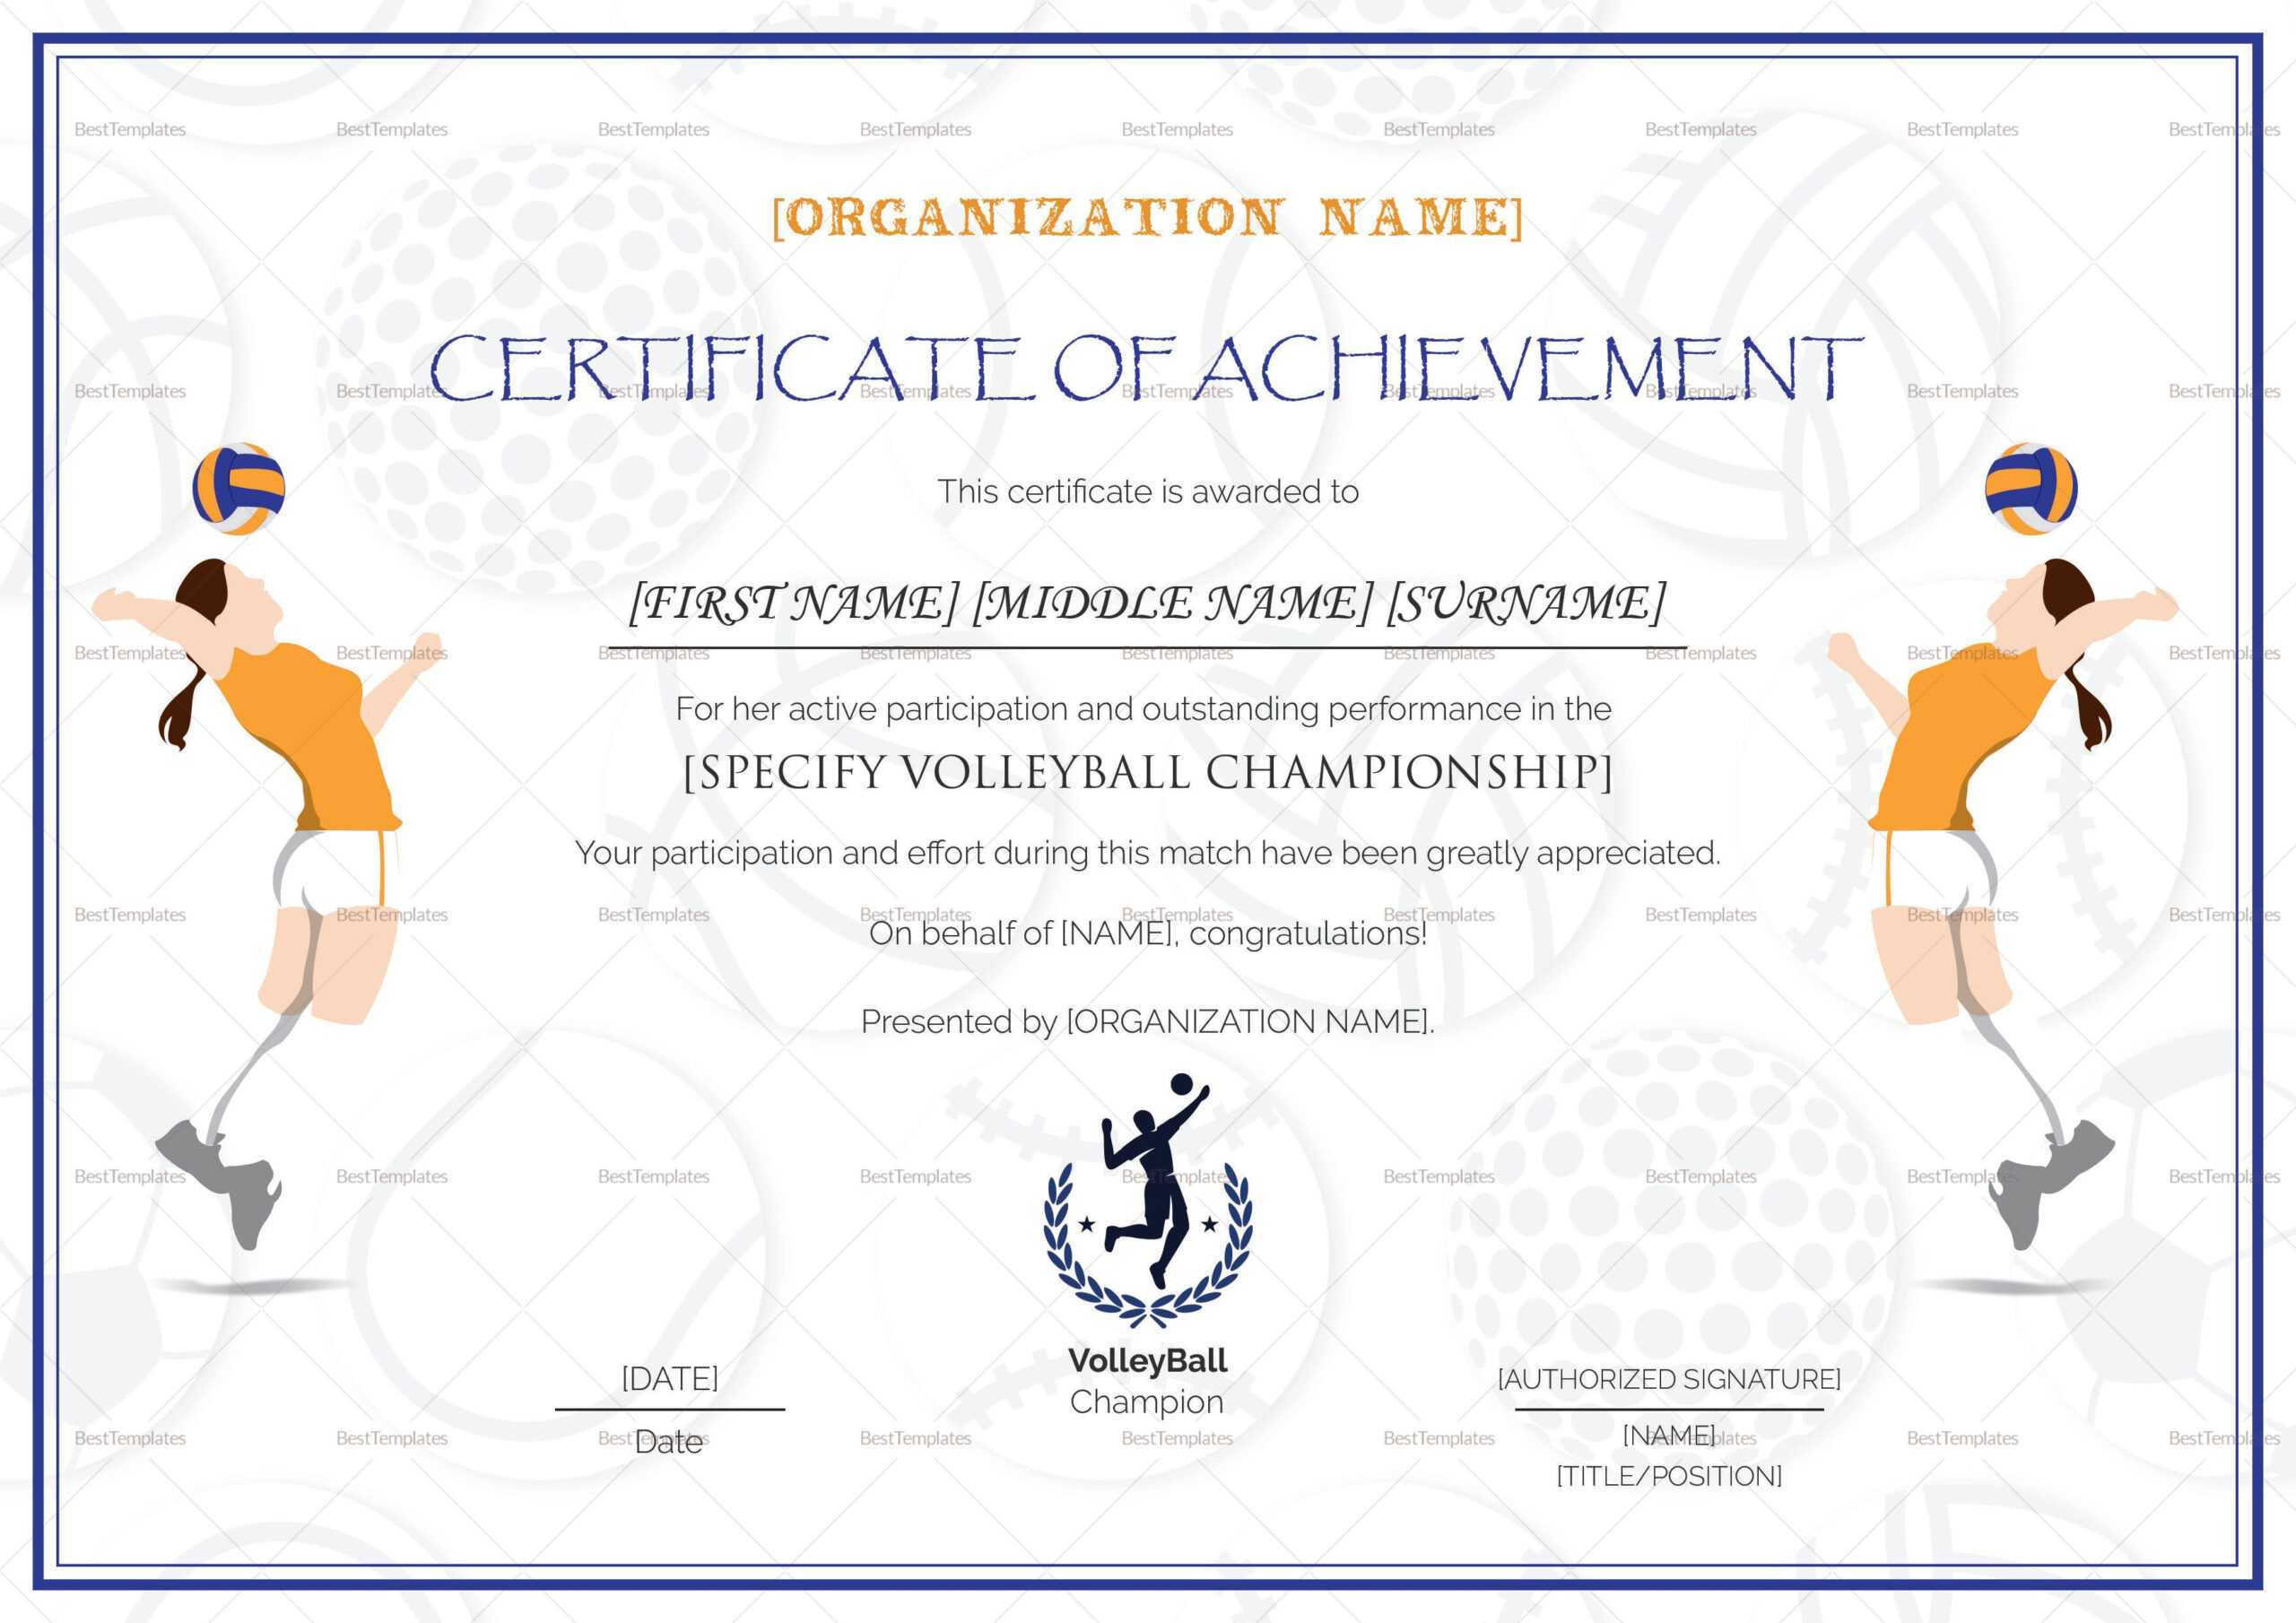 Beautiful Volleyball Certificate Templates – Superkepo With Regard To Beautiful Certificate Templates